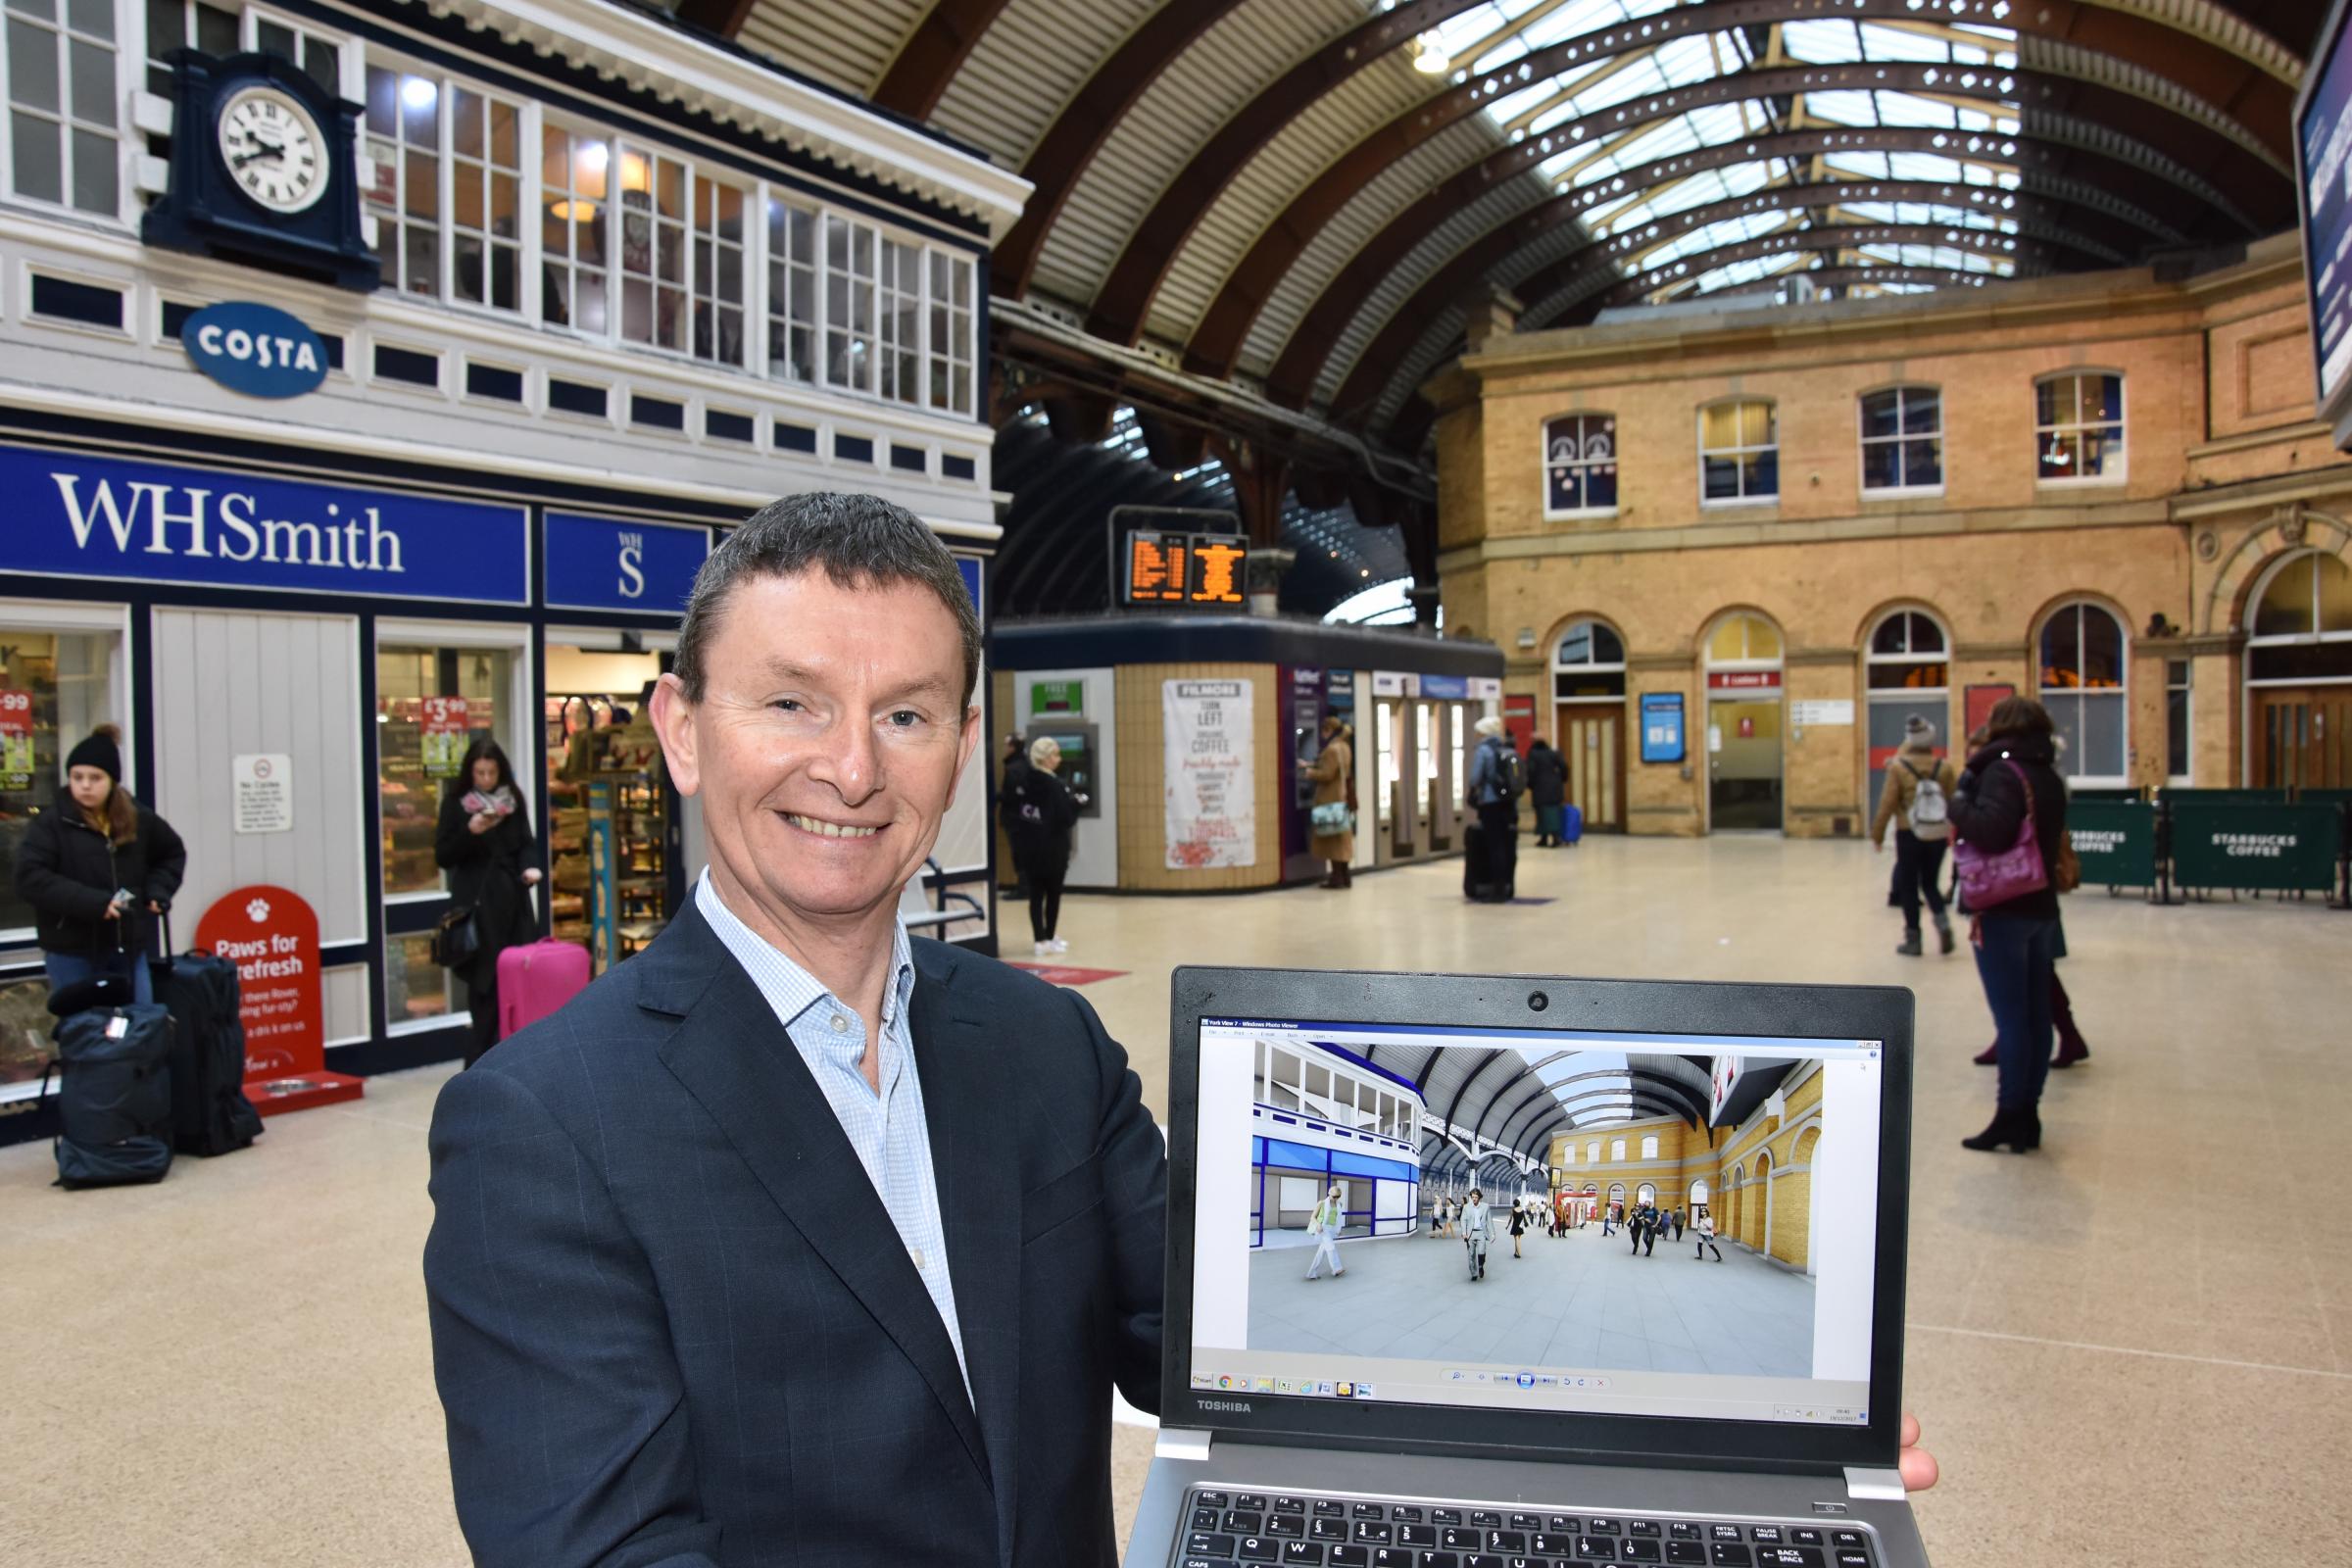 PICTURES: York Station revamp plans get go-ahead